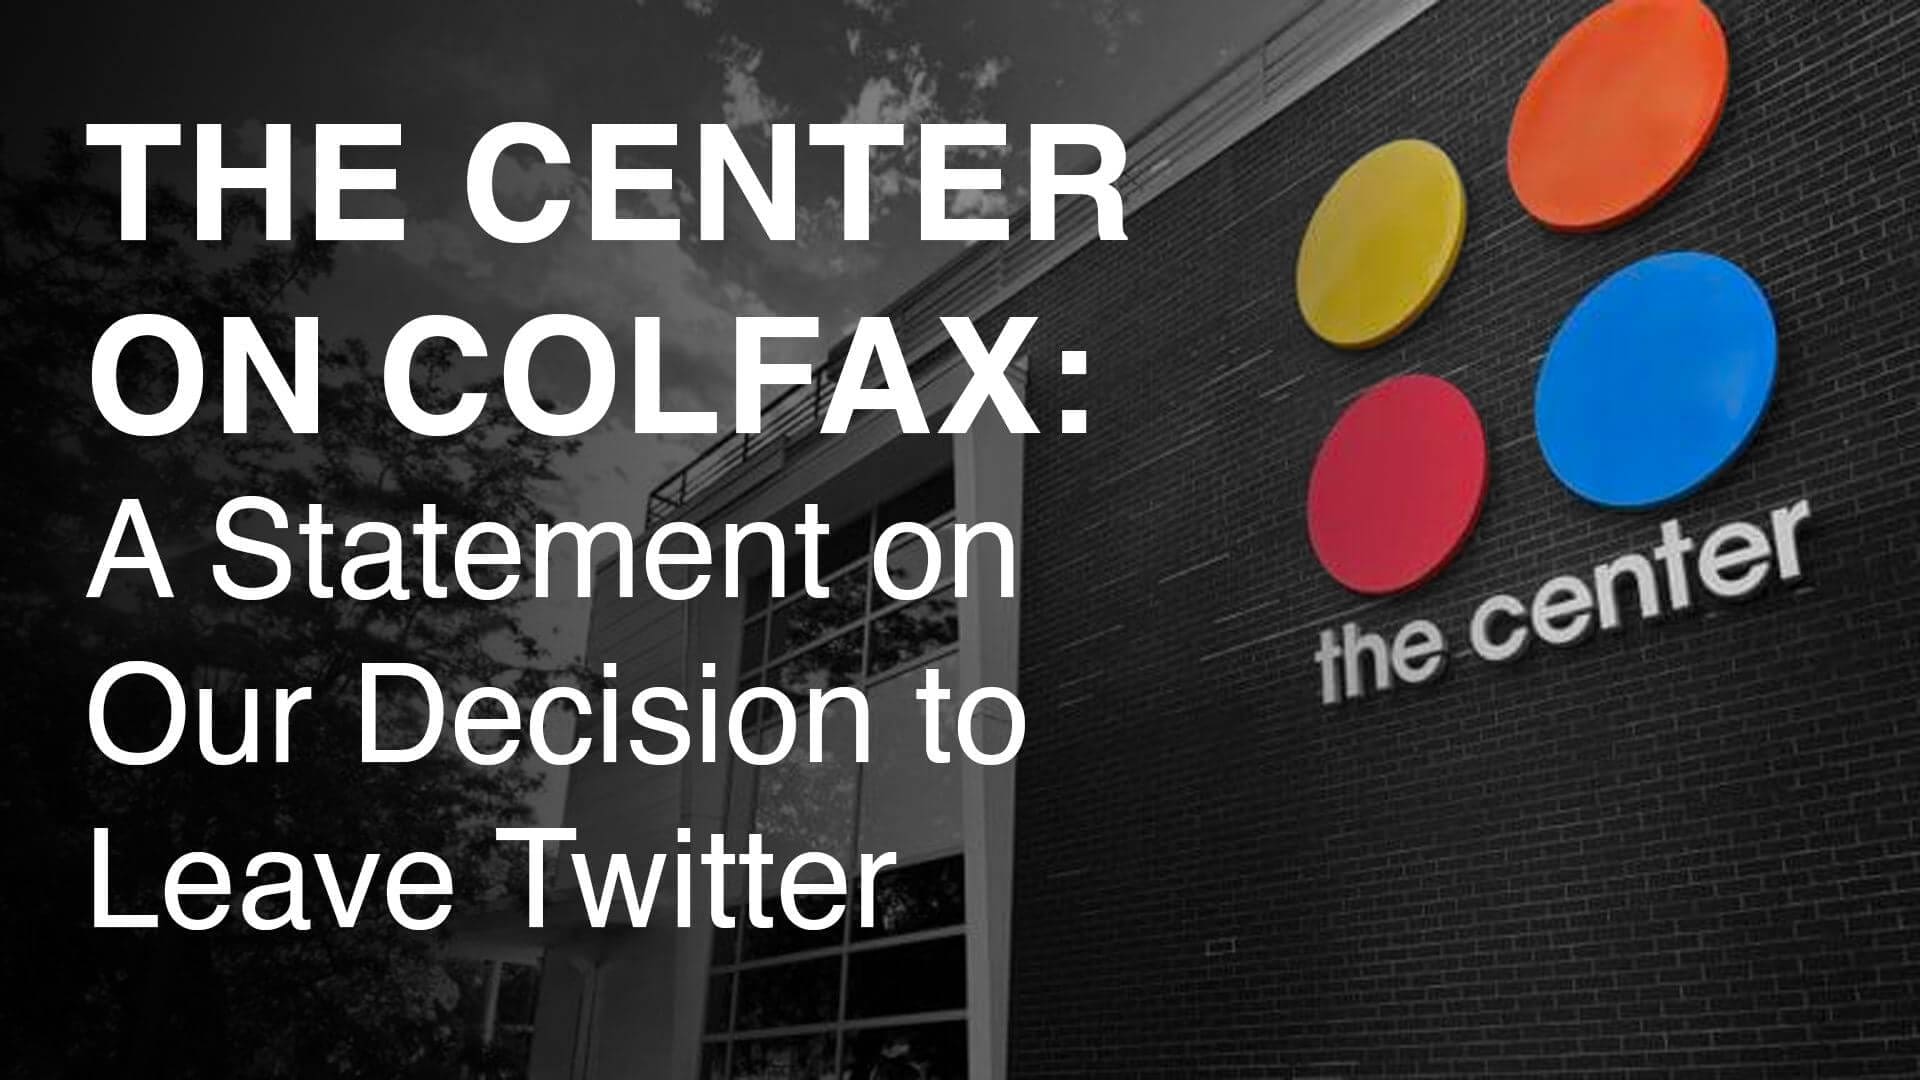 The Center on Colfax: A Statement on Our Decision to Leave Twitter